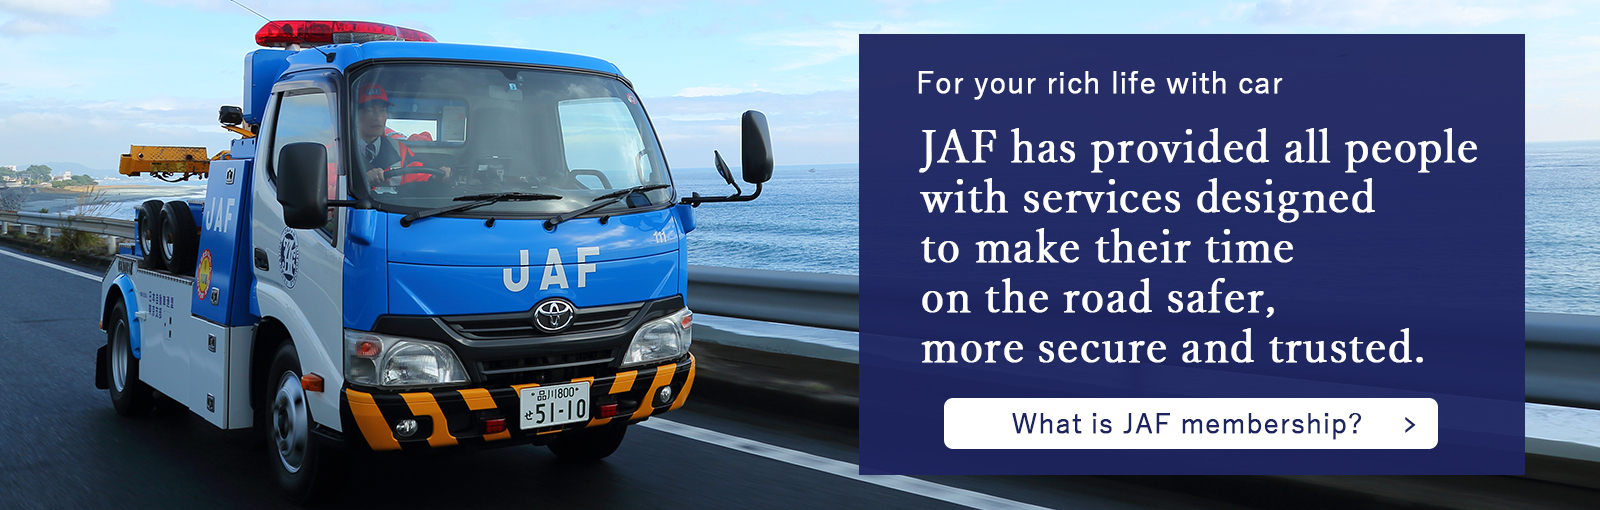 JAF has provided all people with services designed to make their time on the road sefer more secure and trusted